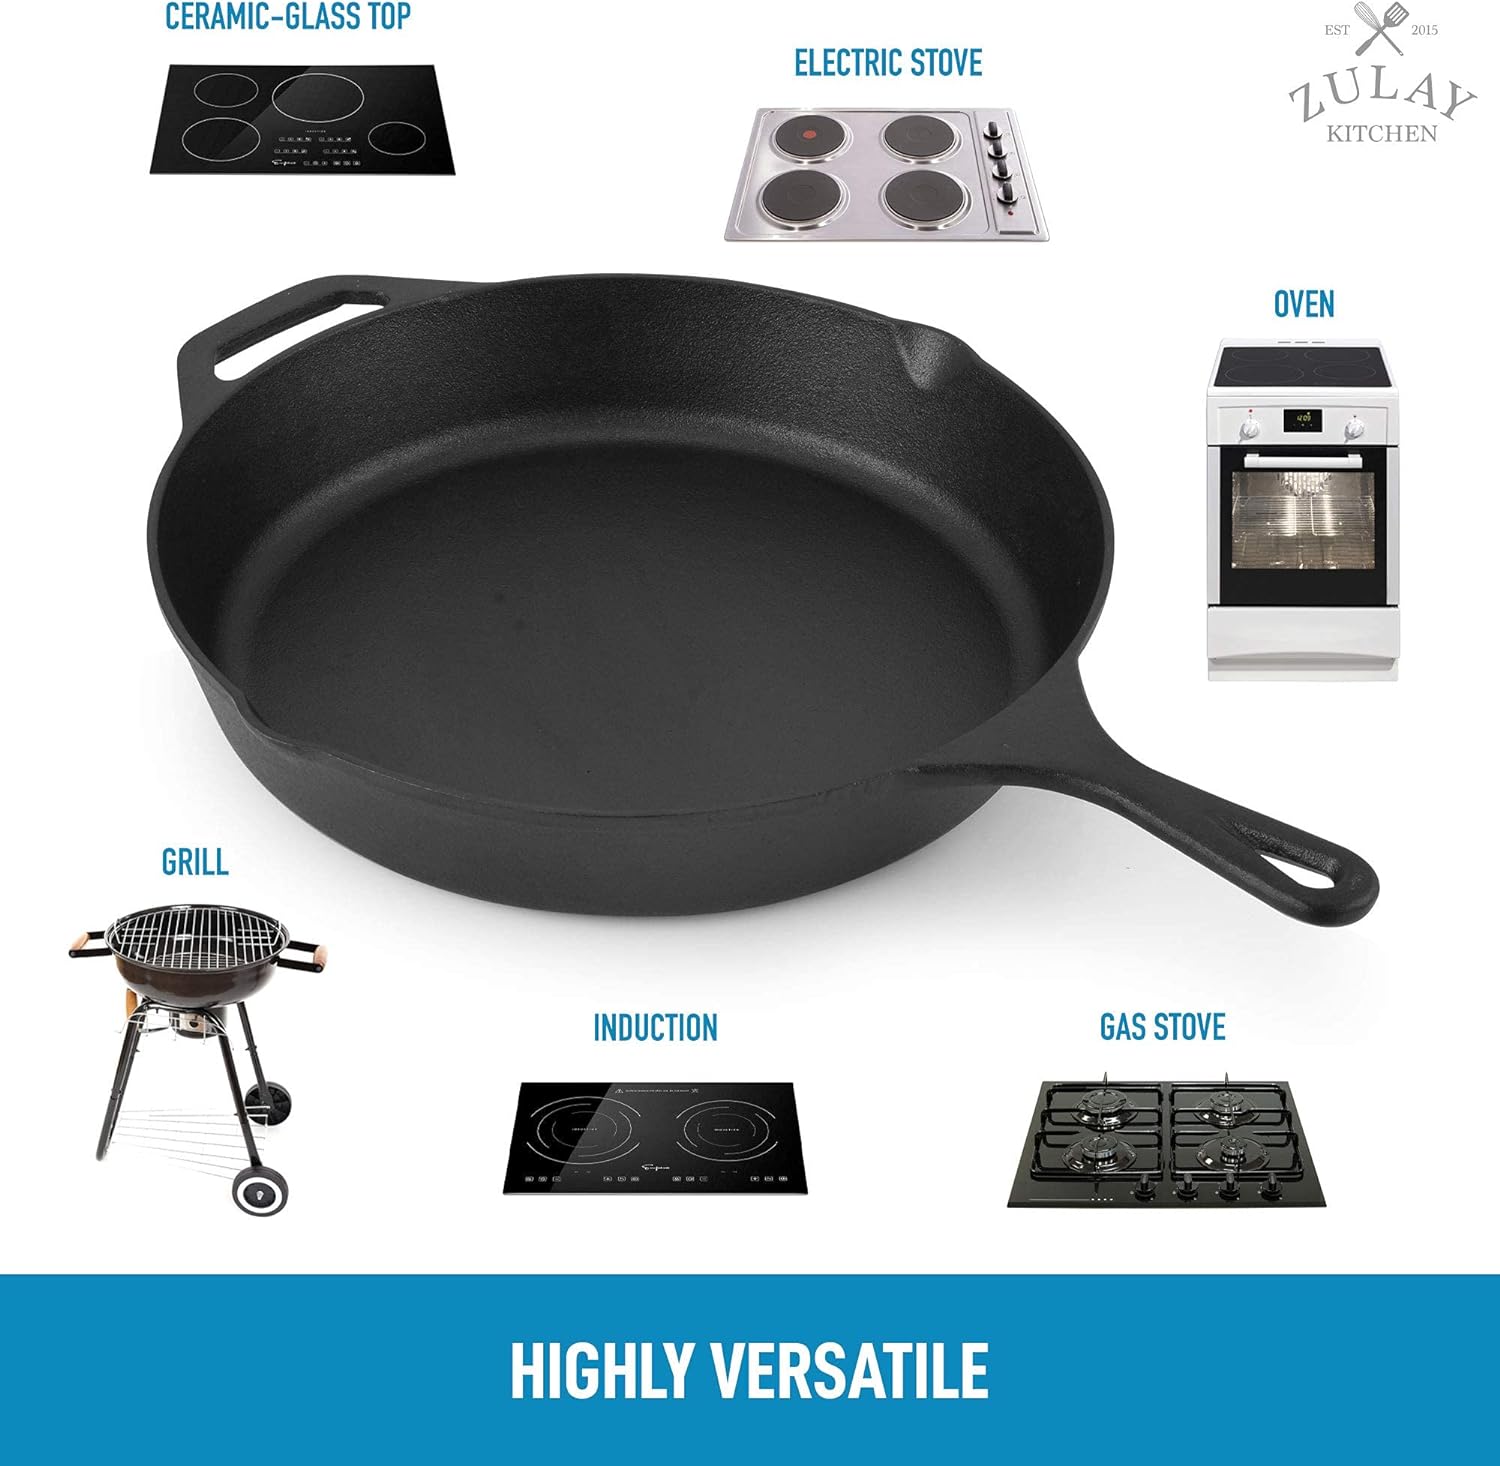  Cast Iron Skillet - 12 Inch Versatile and Durable Cast